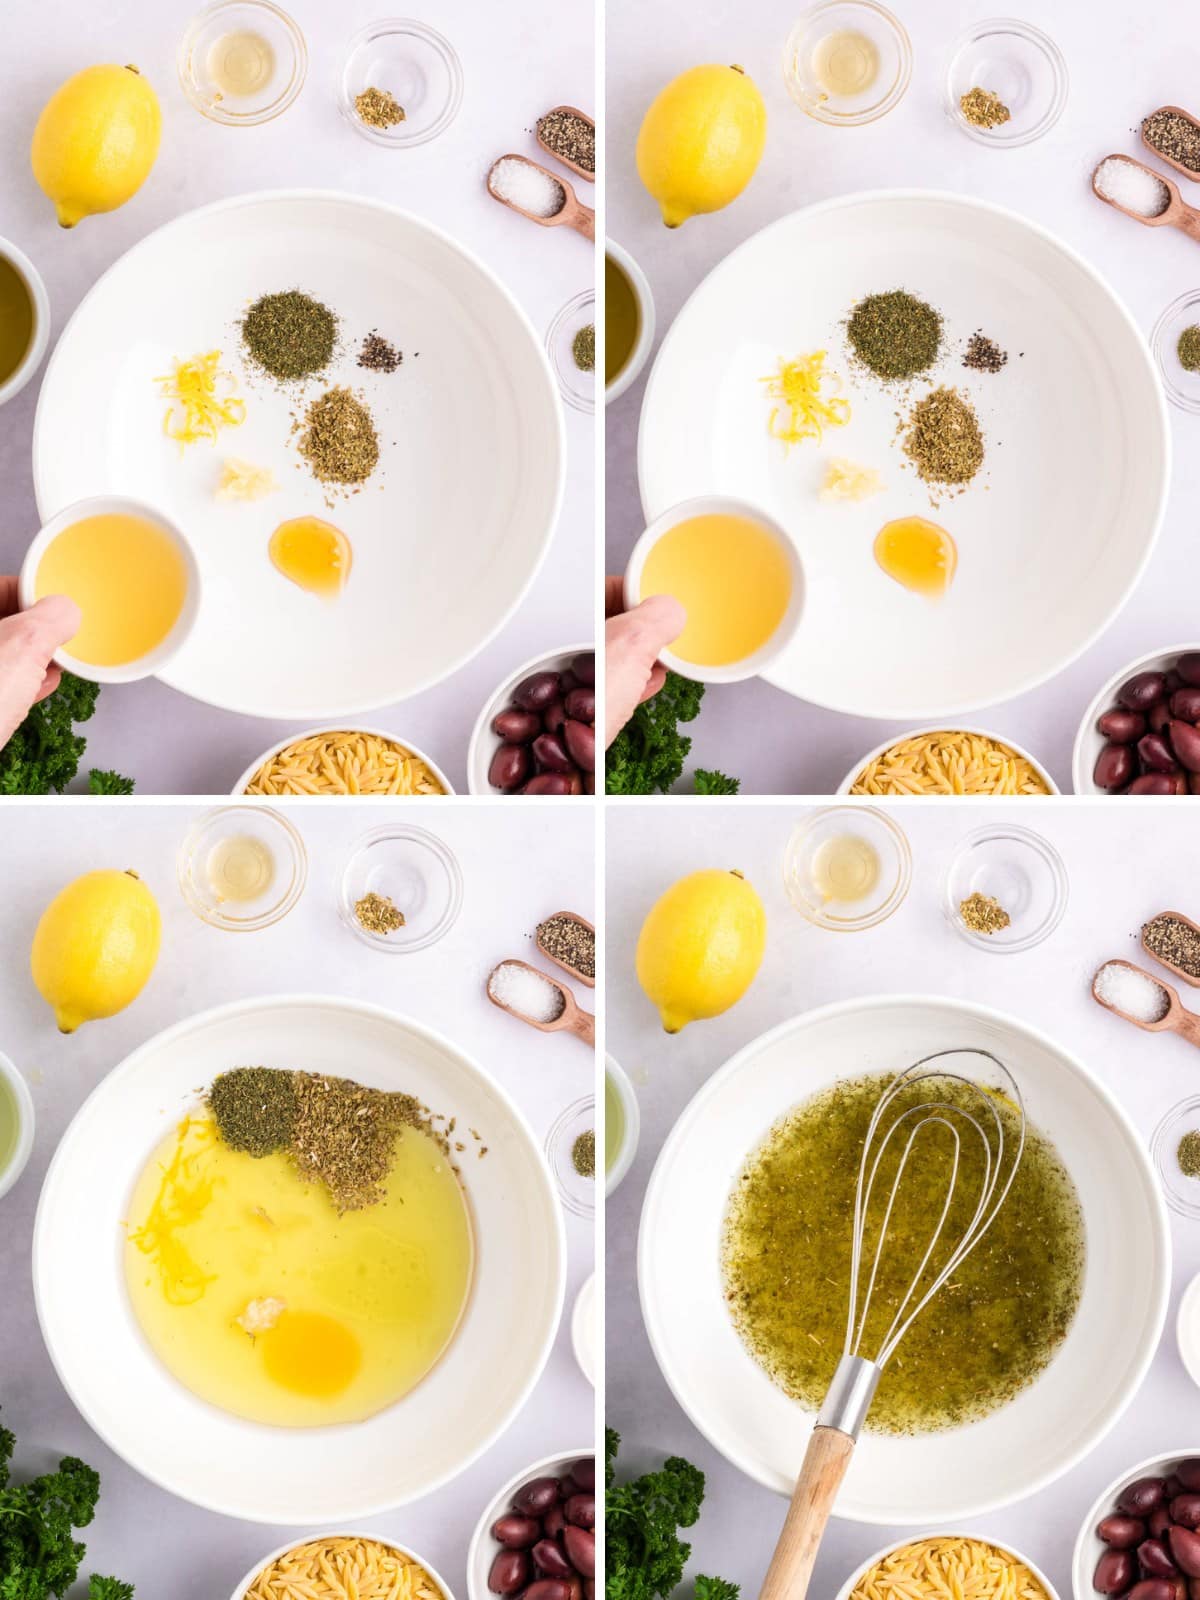 Collage image showing adding lemon vinaigrette ingredients to a large white bowl and whisking to combine.